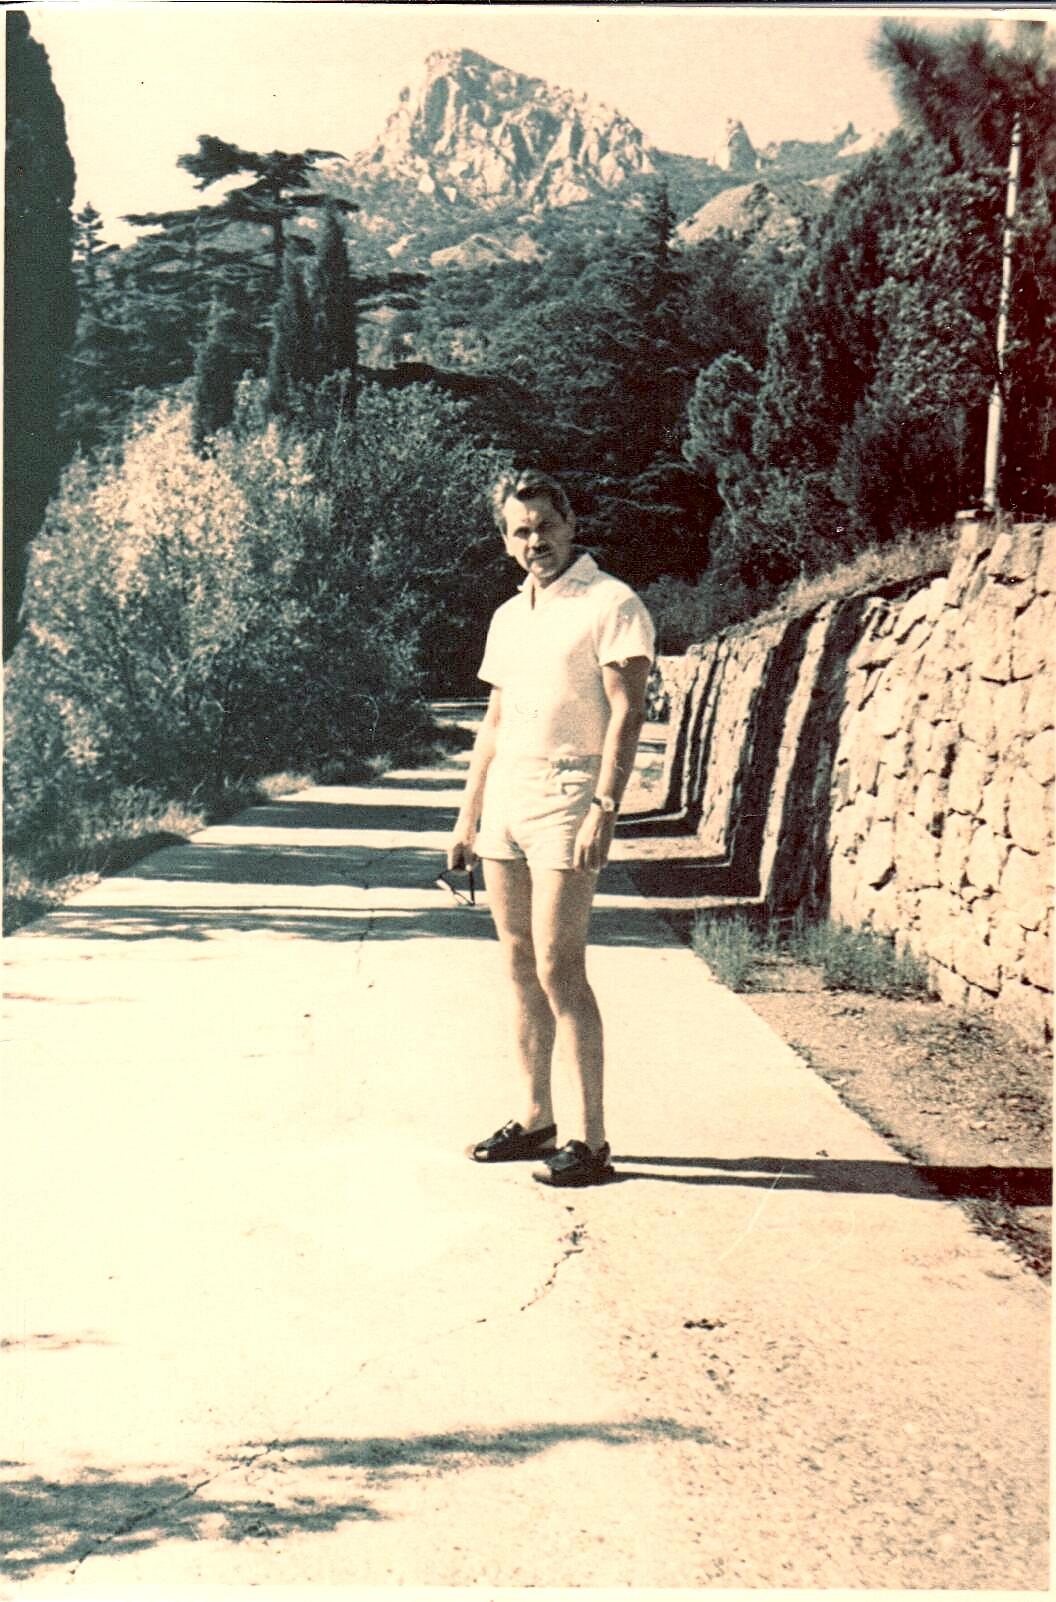 Chernayev on vacation in Crimea, circa early 1980s